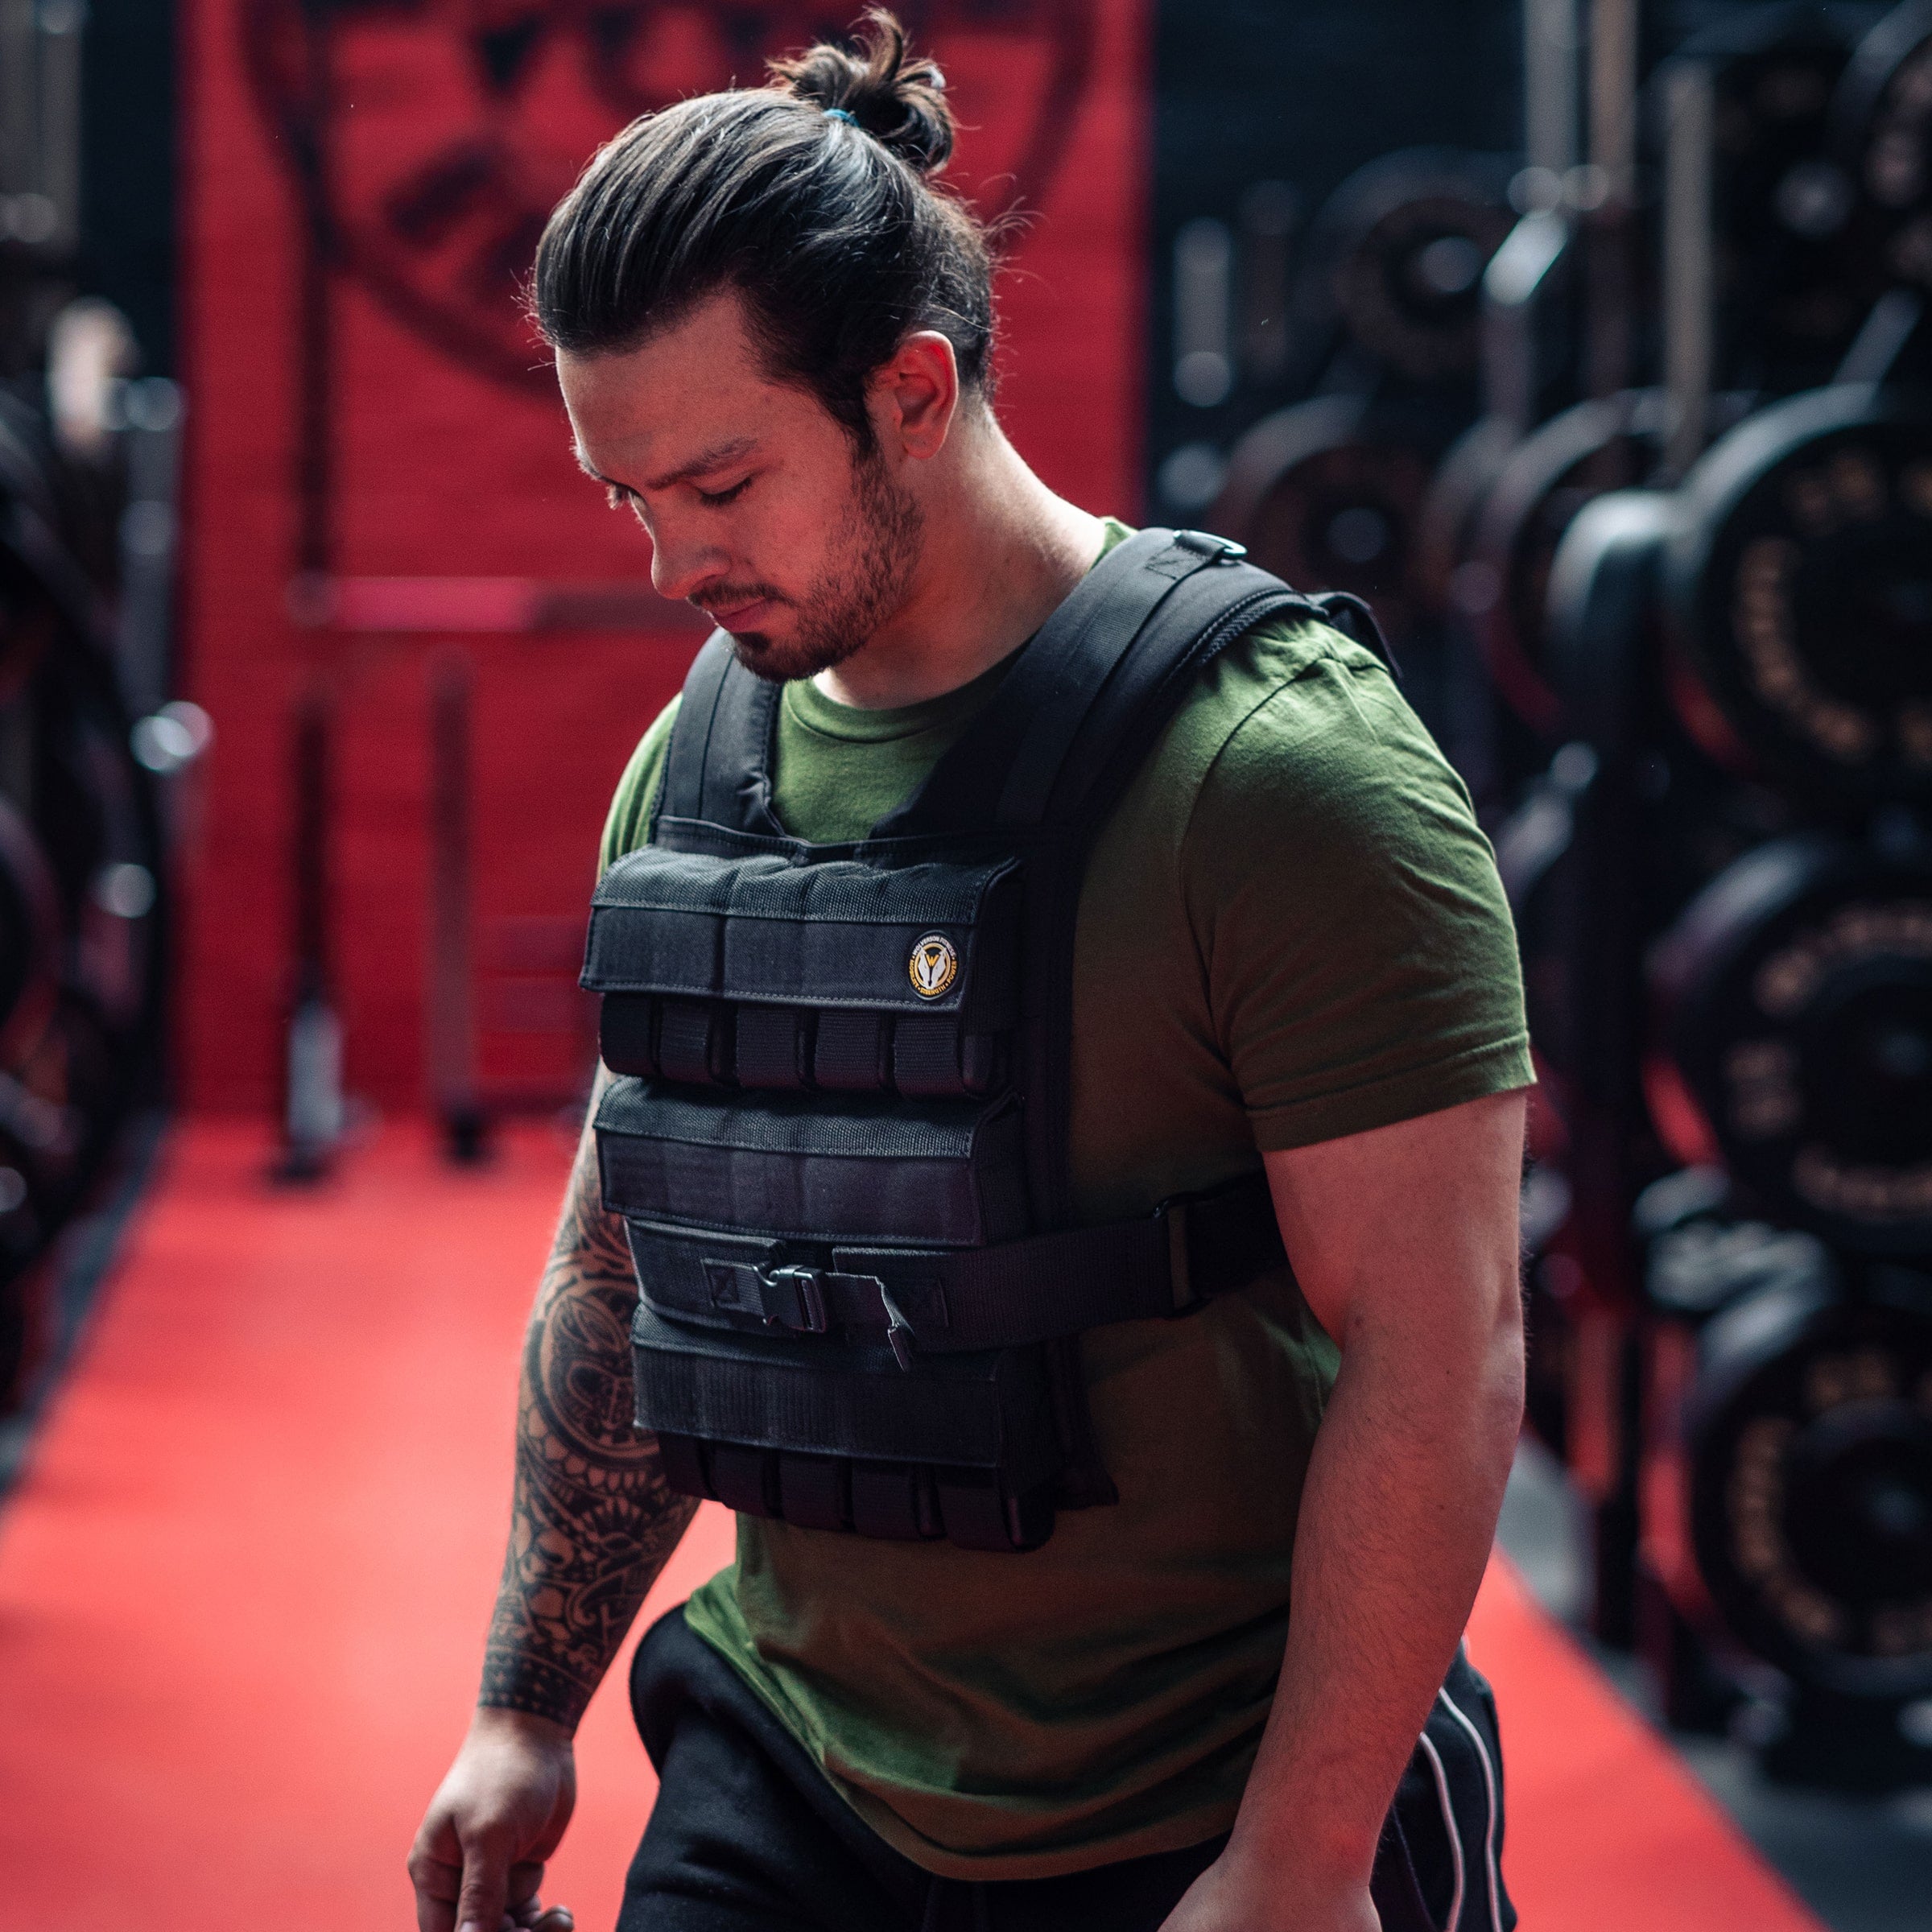  Premium Weighted Vest for Training. Body Weight Workout Weight  Vest 25/35/45lbs, Adjustable Weighted Vest Men for Calisthenics, CrossFit,  Home Workouts : Sports & Outdoors